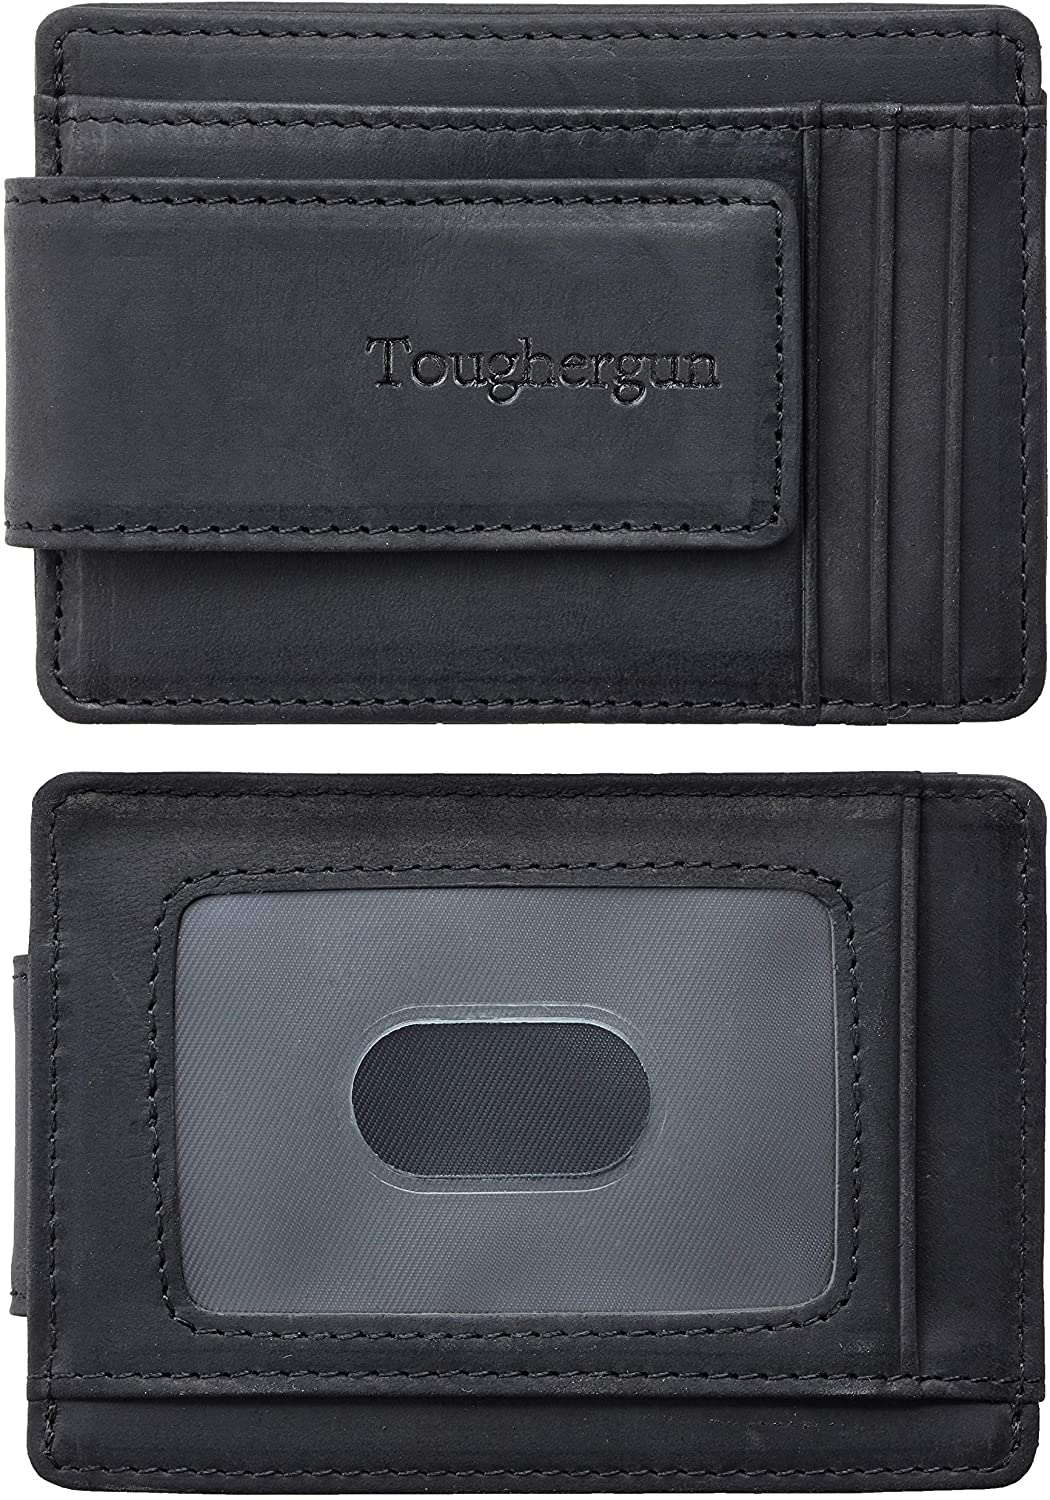 New Strong Magnets! Magnetic Money Clip - Black Leather